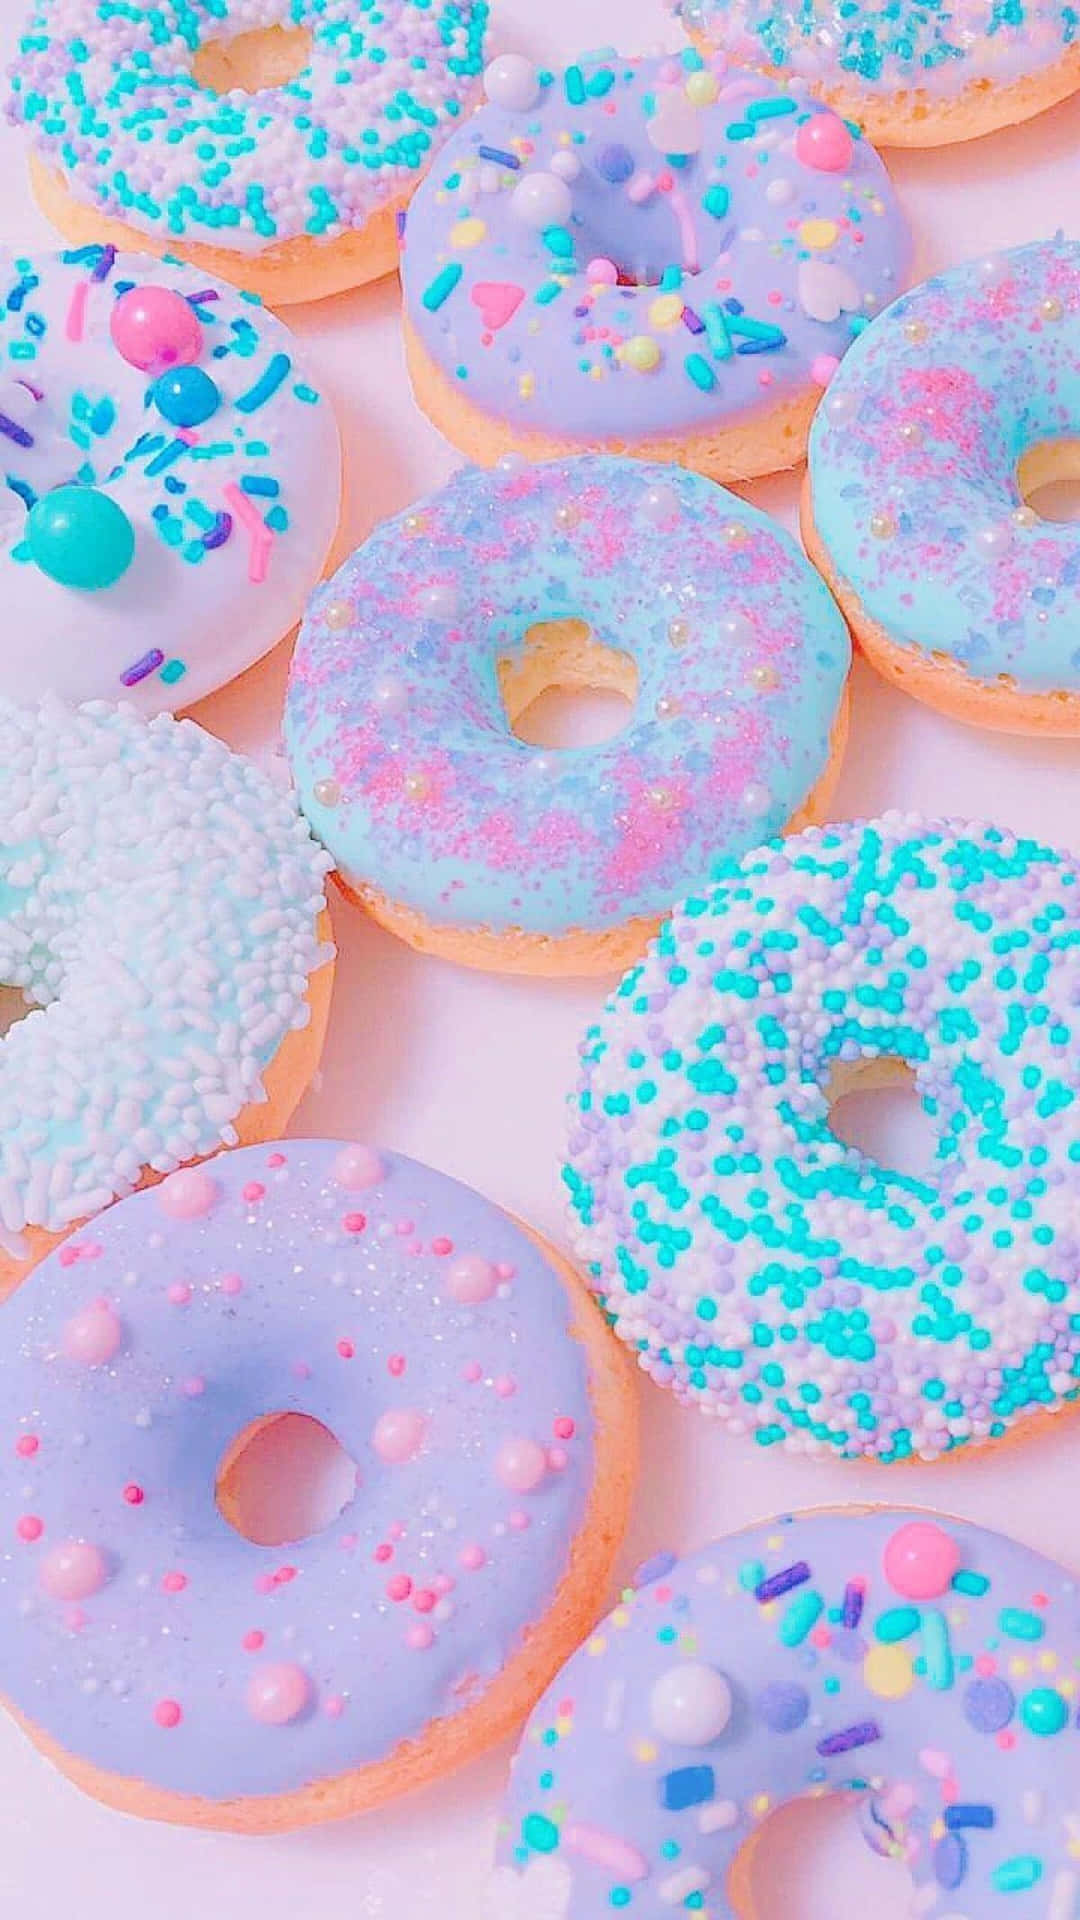 Download wallpaper 1125x2436 doughnut, sweets, food, iphone x, 1125x2436 hd  background, 1428